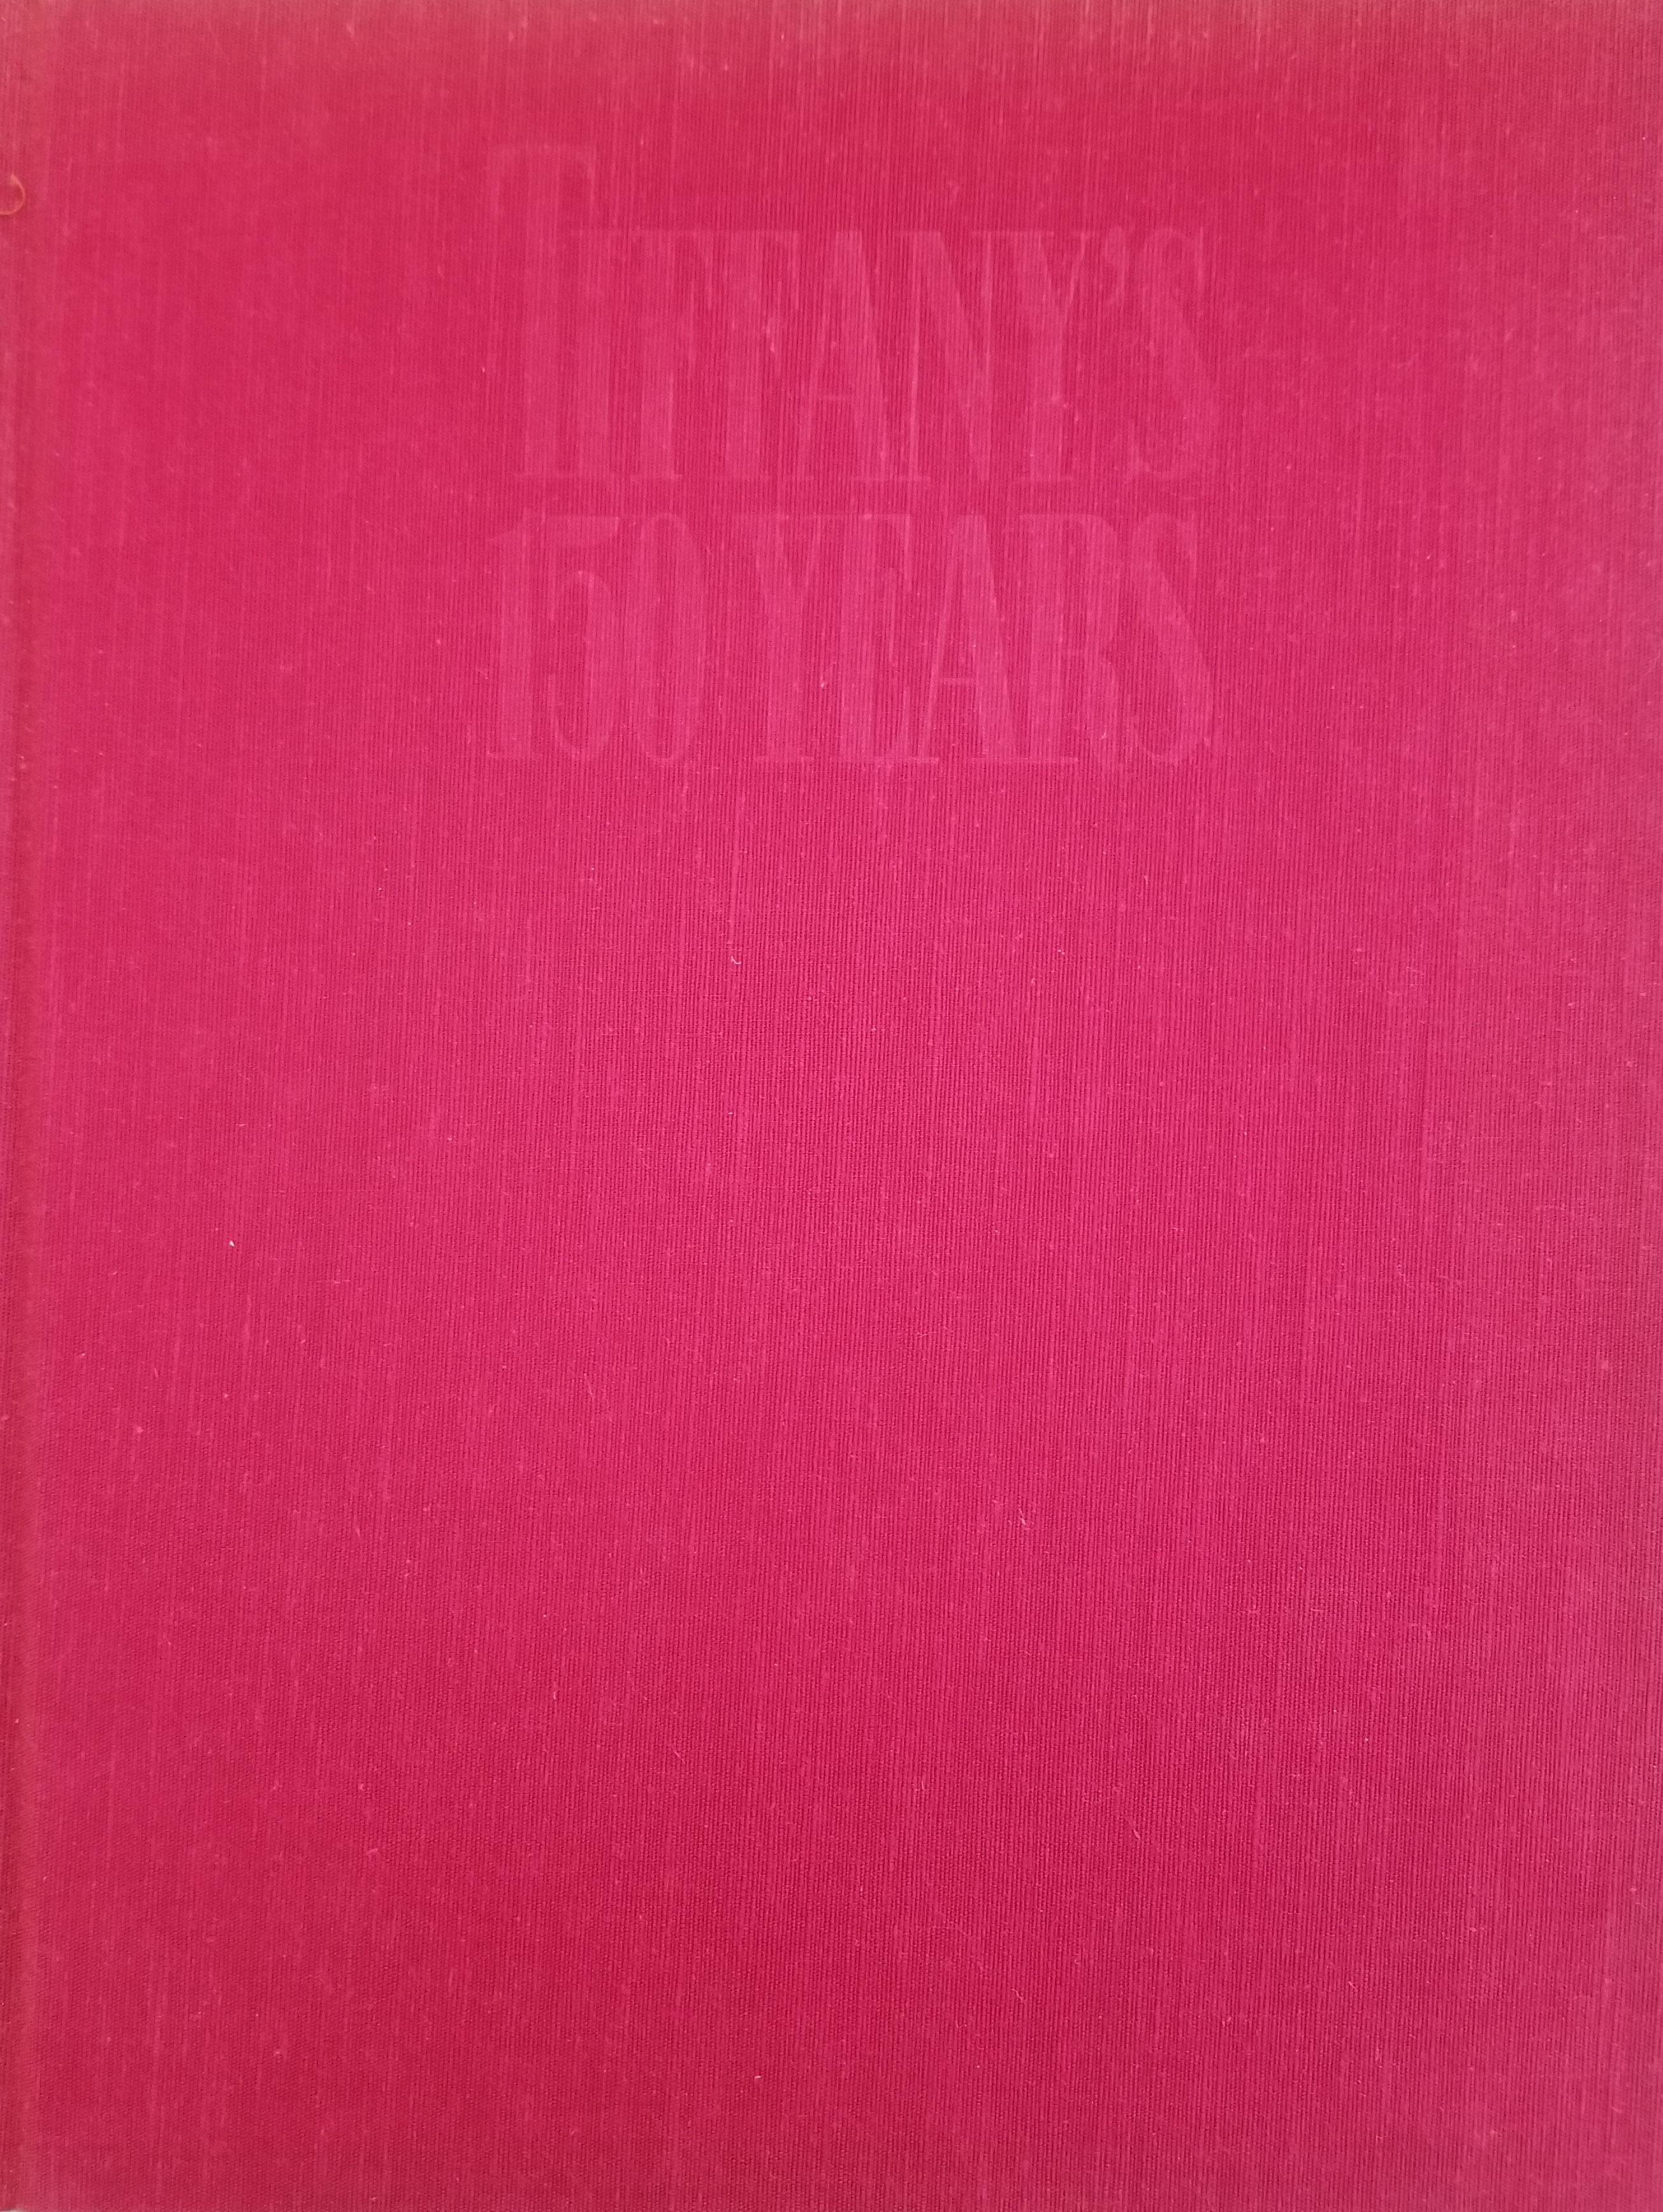 Tiffany's 150 years by John Loring. First edition, published in 1987 by Doubleday & Company Inc. of Garden City, New York. Hardcover, 192 pages.